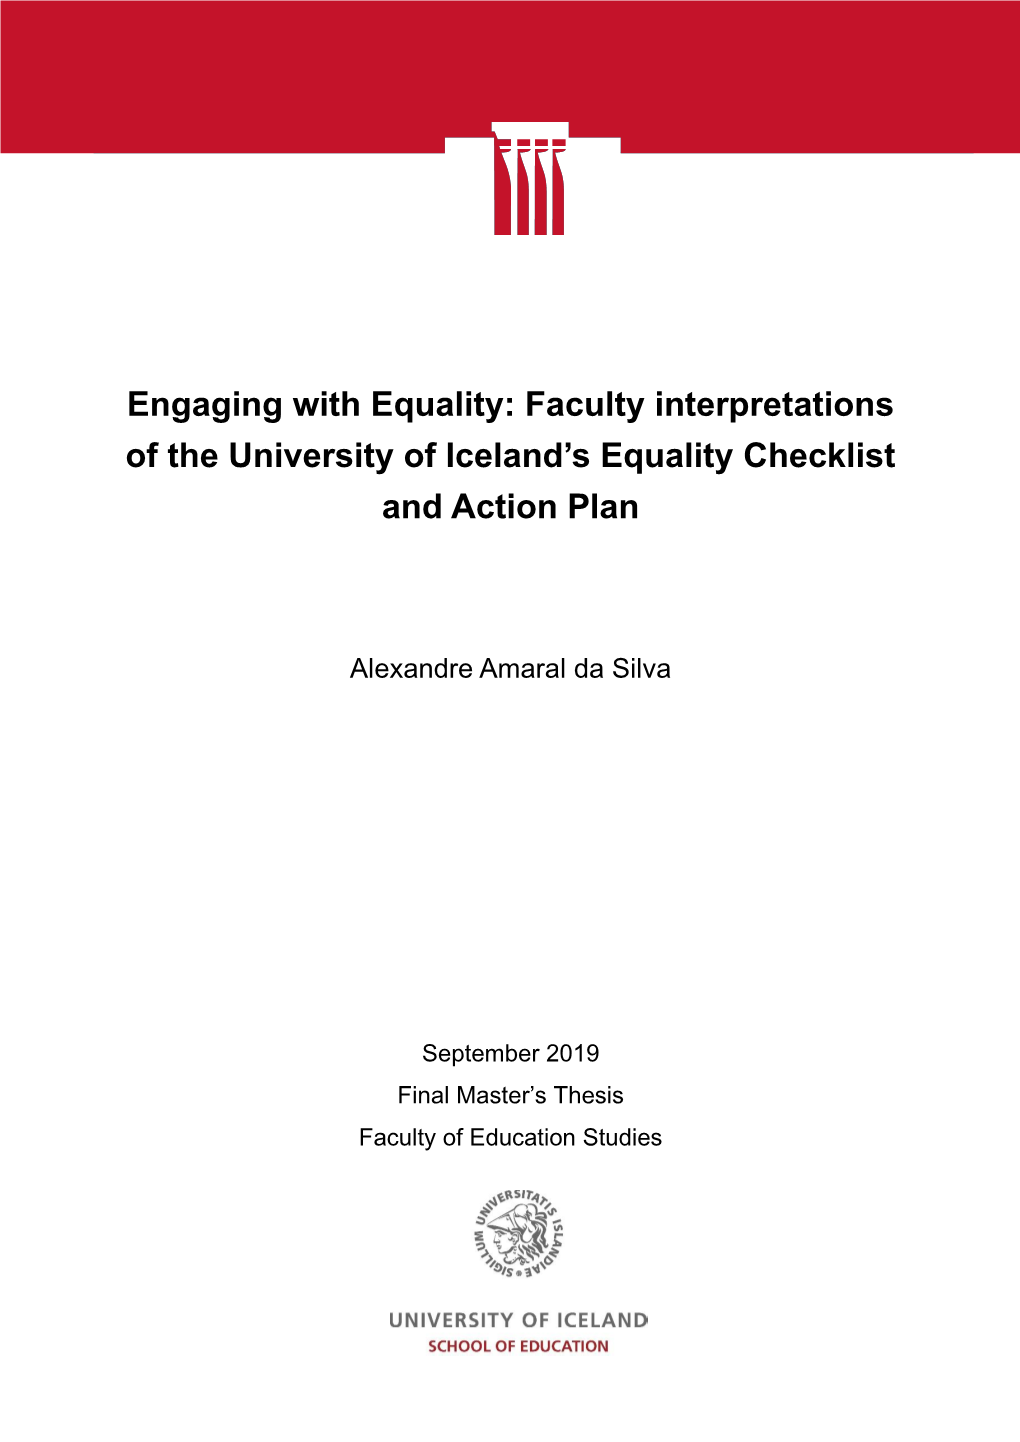 Faculty Interpretations of the University of Iceland's Equality Checklist and Action Plan